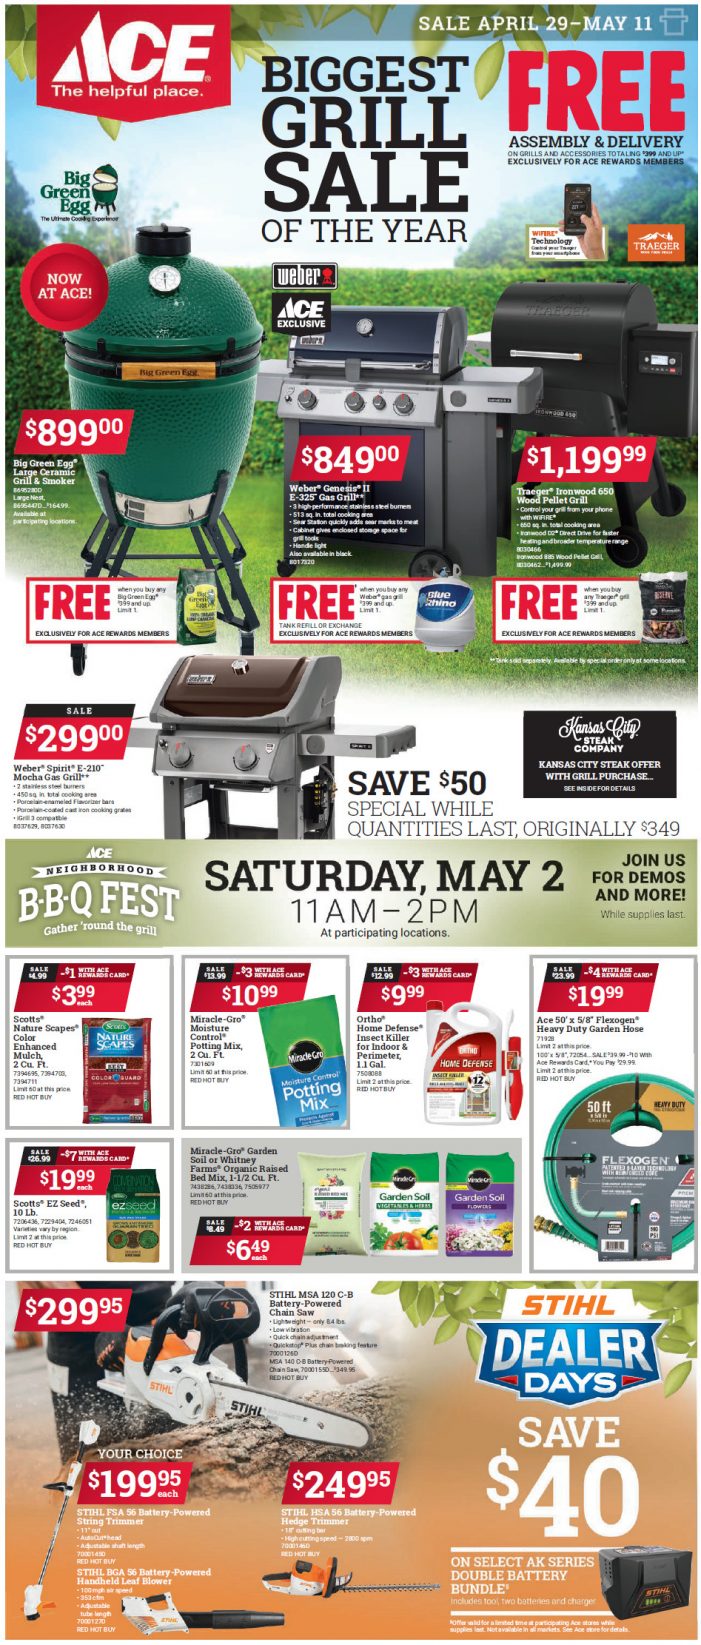 Arnold Ace Home Center’s Biggest Grill Sale of The Year!!